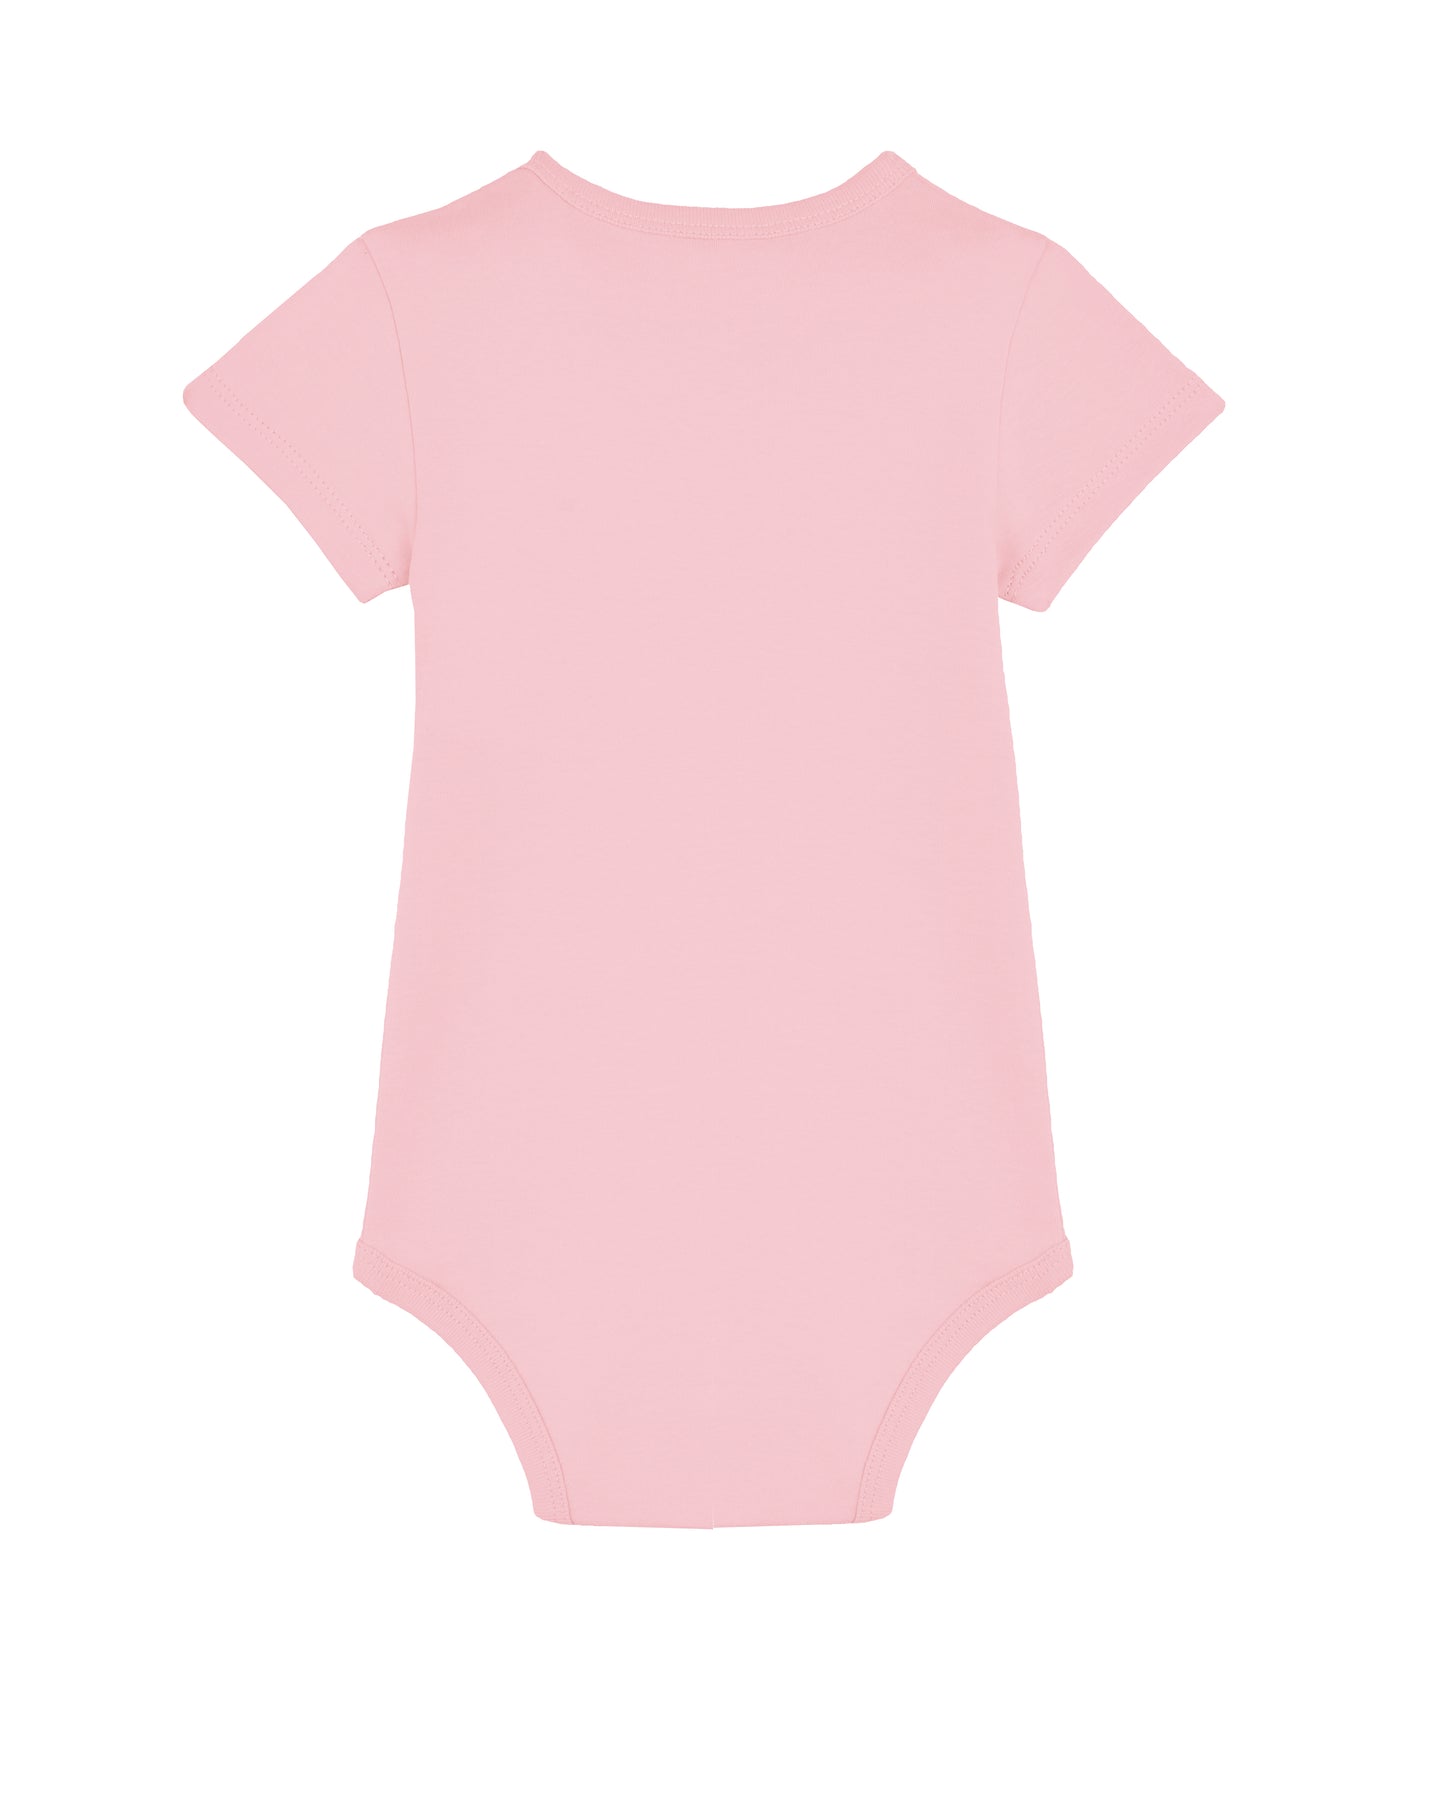 PIERRE BERGER - 100% organic cotton baby bodysuit embroidery